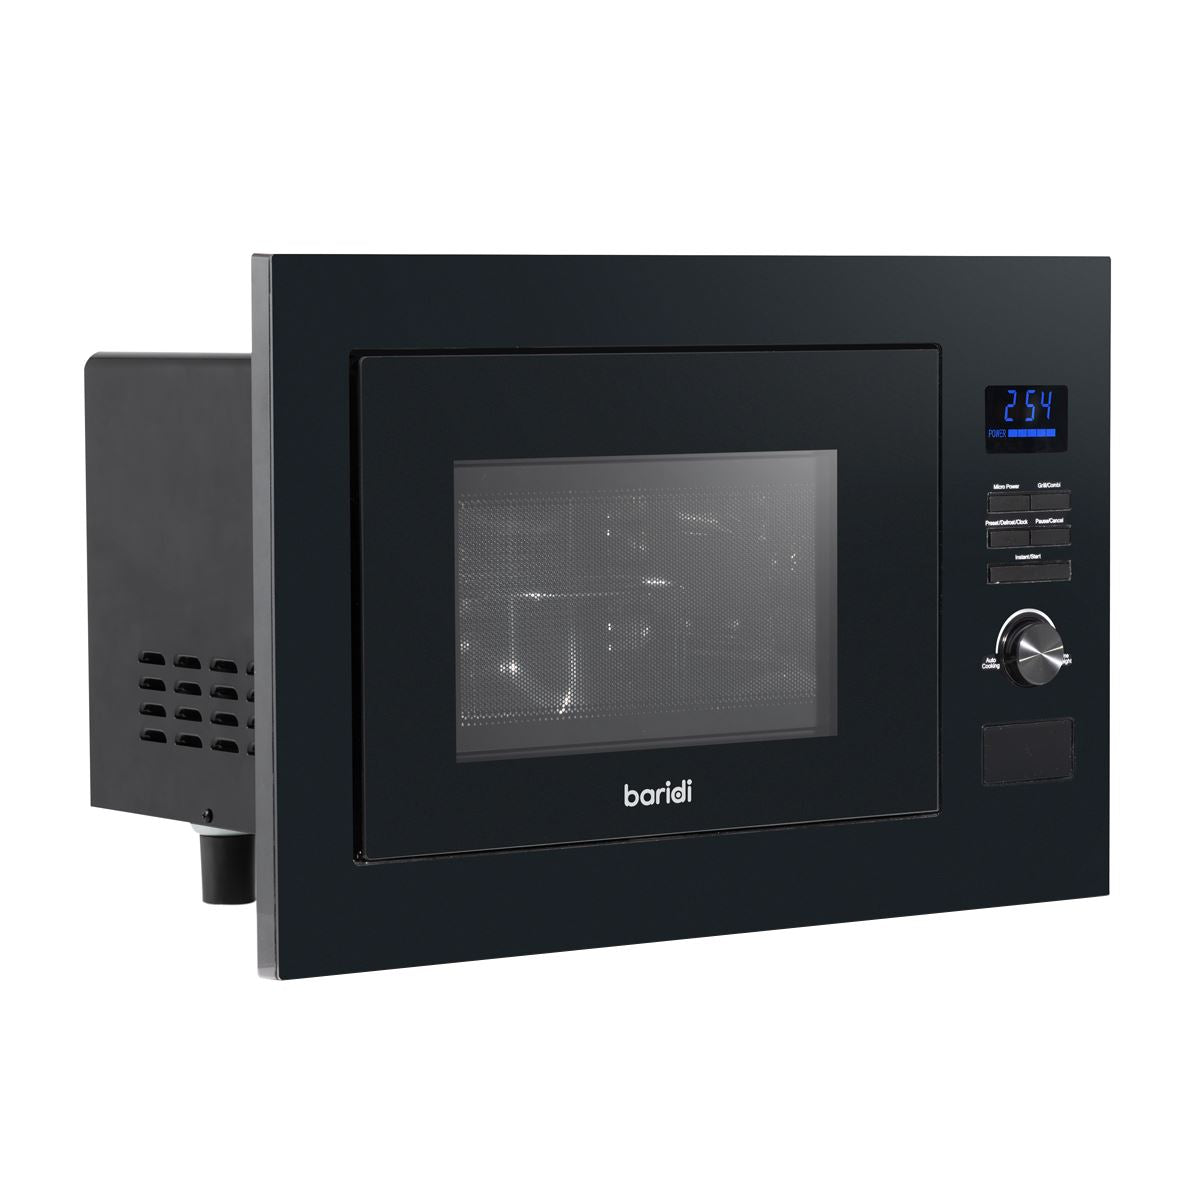 Baridi 25L Integrated Microwave Oven with Grill, 900W, Sensor Touch Controls, Black